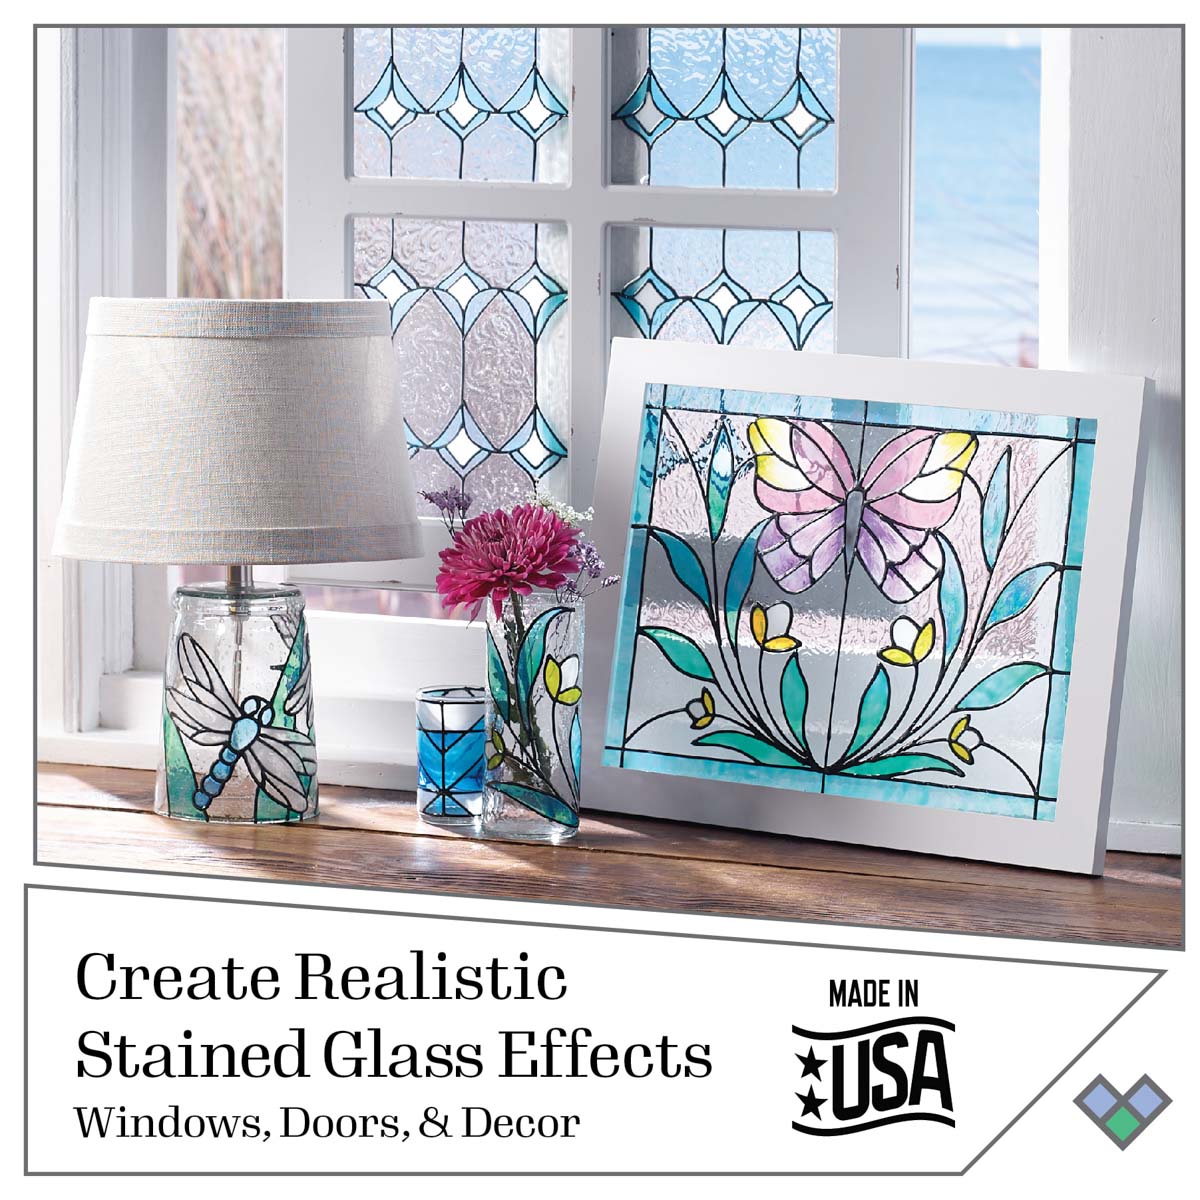 Gallery Glass ® Stained Glass Effect Paint - Bright White, 2 oz. - 19692